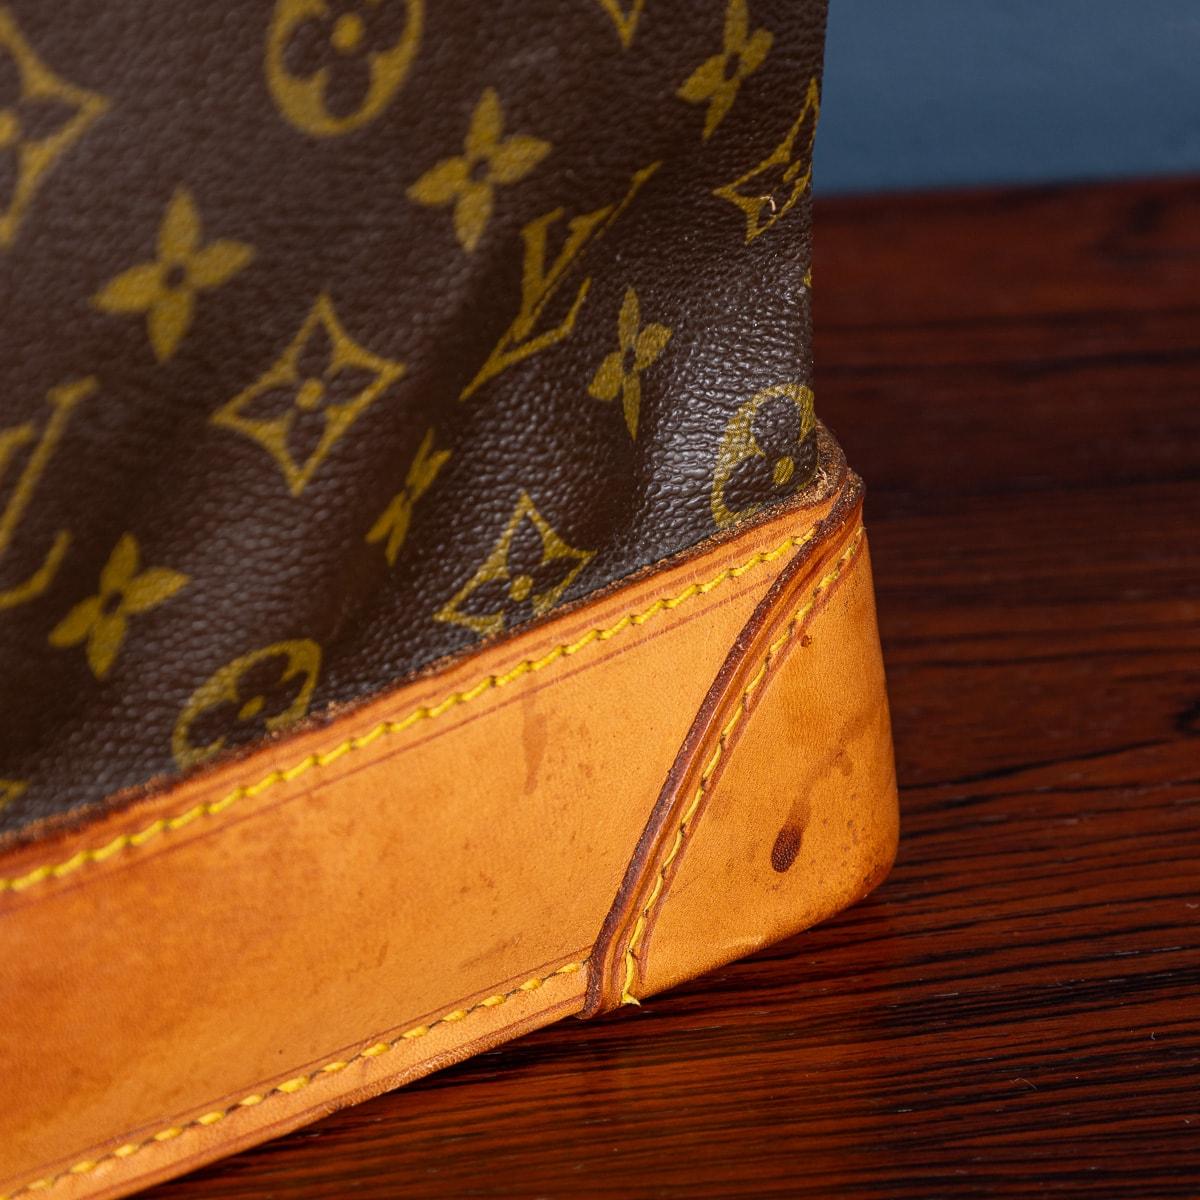 20th Century Louis Vuitton Steamer Bag In Monogram Canvas, Made In France For Sale 4